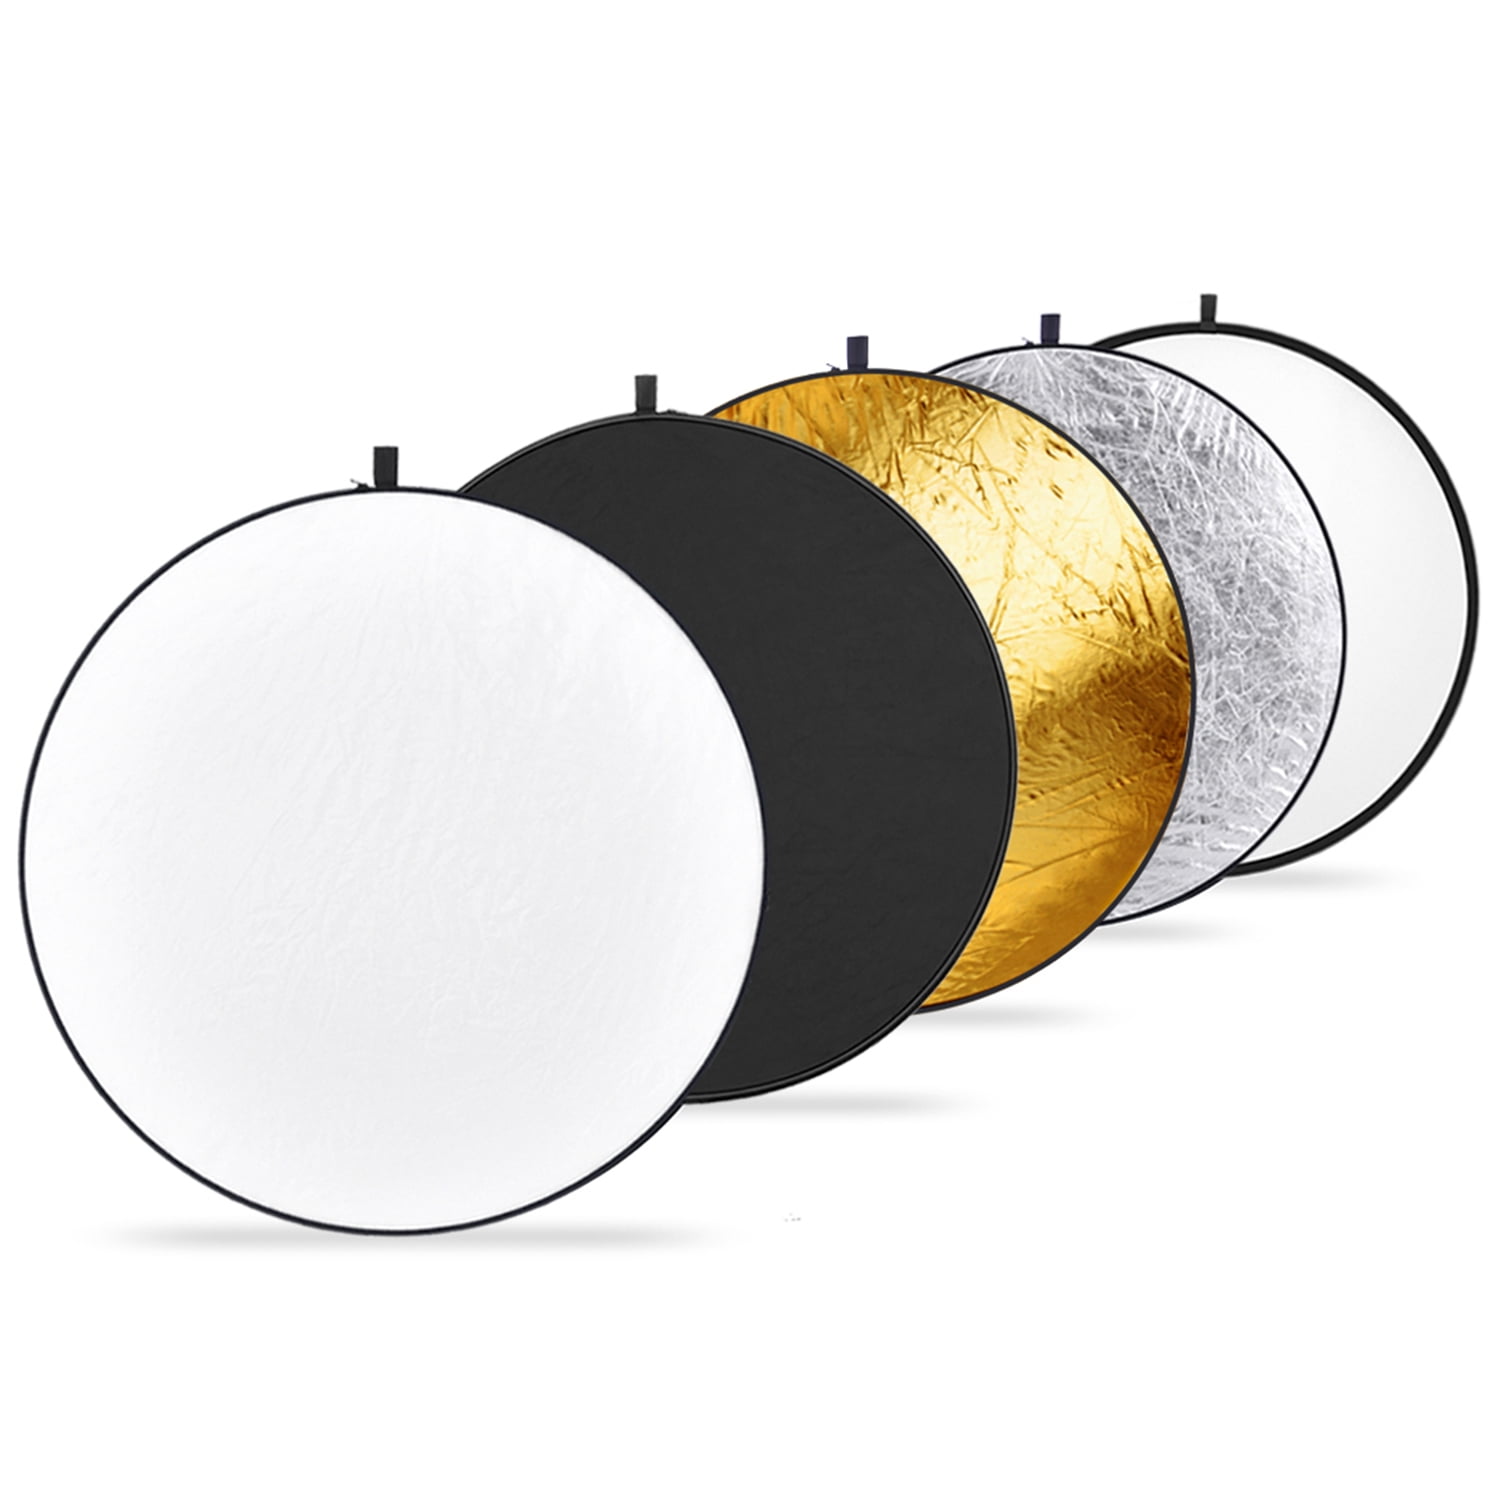 42" Inch 106cm 5-in-1 Light Mulit Collapsible Reflector 